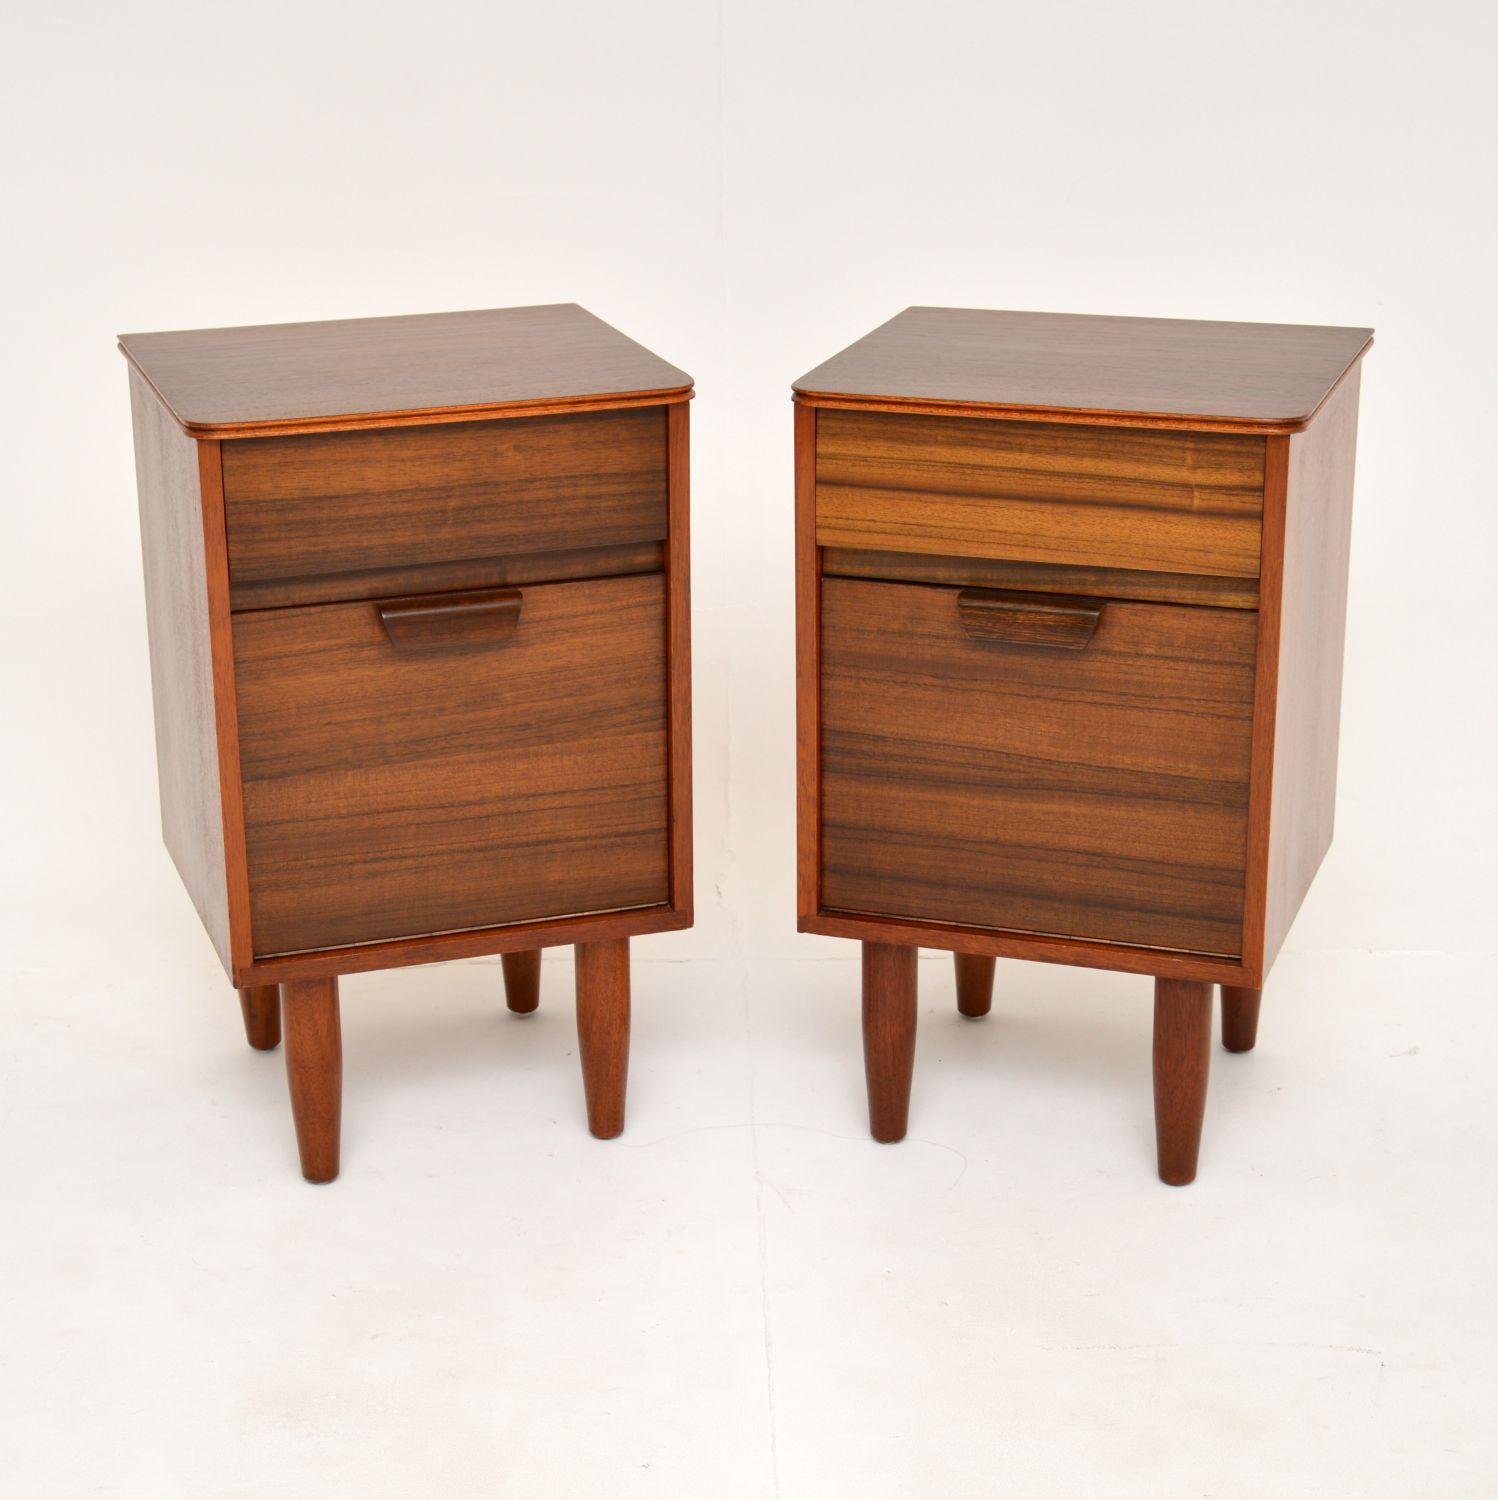 A smart and stylish pair of vintage walnut bedside cabinets. These were made in England by Uniflex and were designed by Gunther Hoffstead. They date from the 1960’s.

The quality is superb, these are beautifully designed and are a very useful